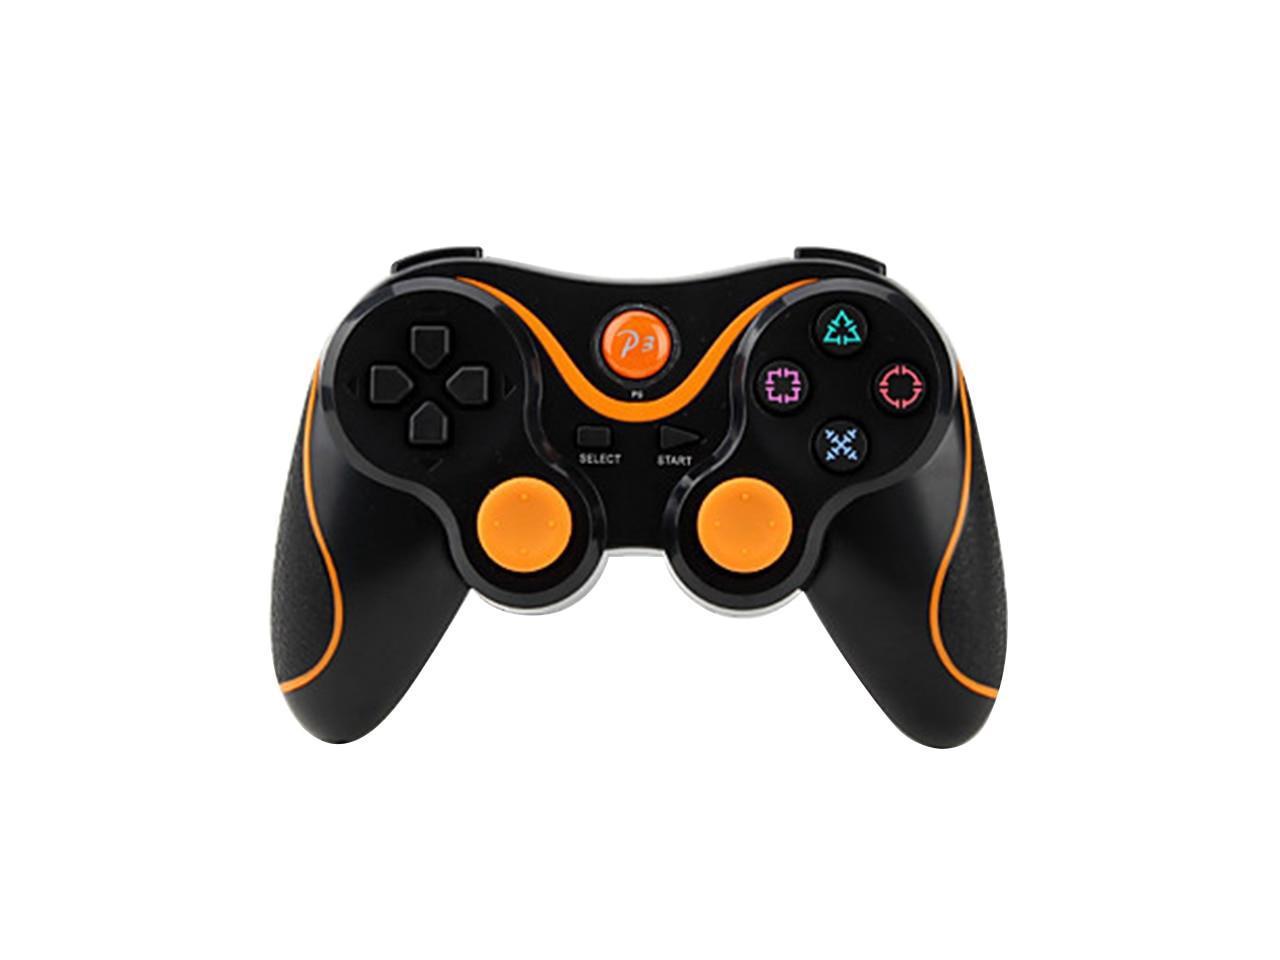 Bluetooth Wireless Gamepad For PS3 Game Controller Dual Vibration Joystick Gamepad For Playstation Sixaxis Motion Sensing Control